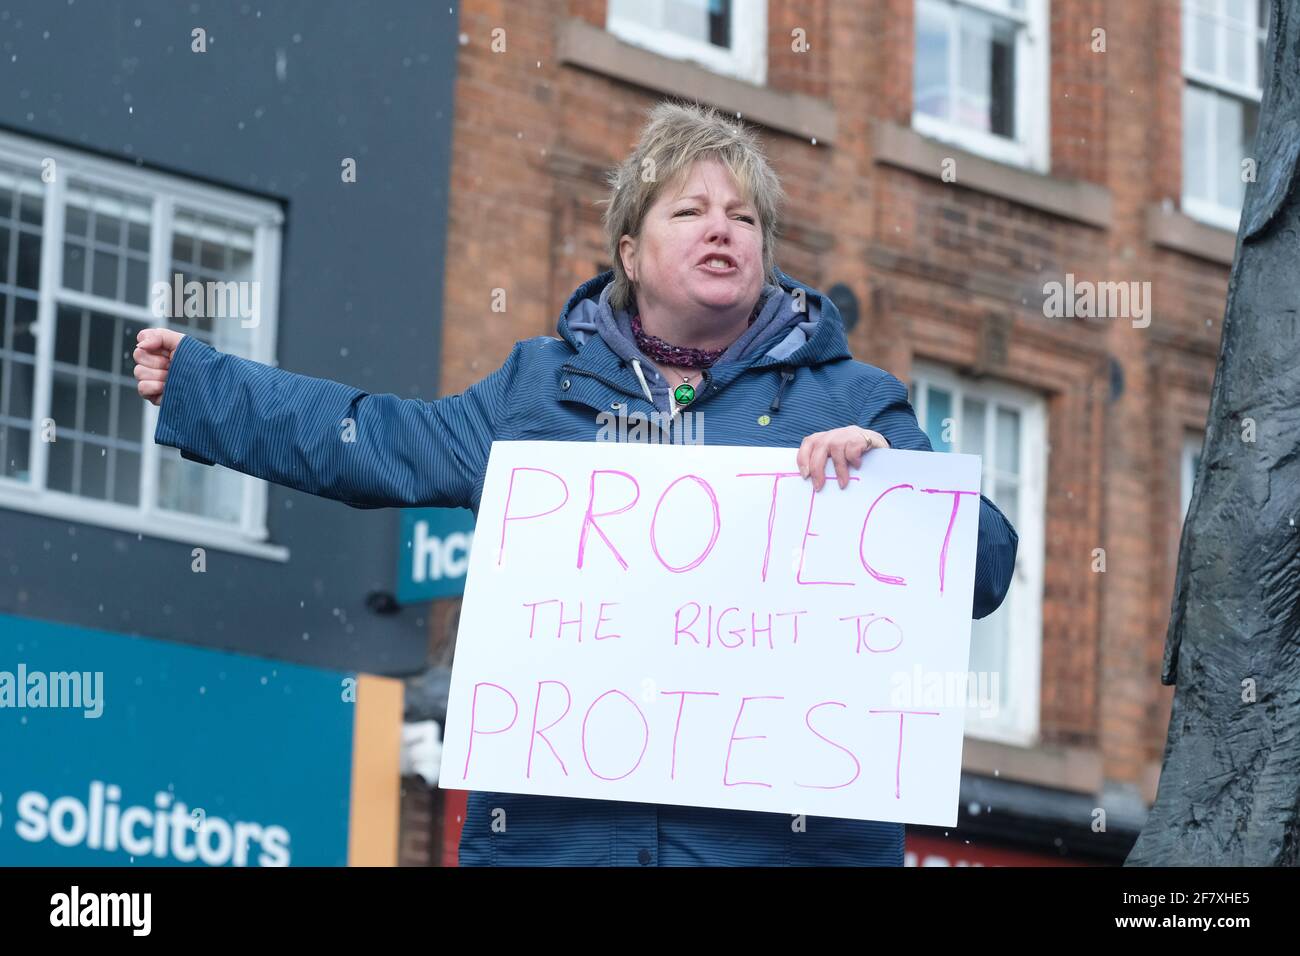 Worcester, Worcestershire, UK – Saturday 10th April 2021 – Kill The Bill protesters demonstrate in Worcester city centre against the new Police, Crime, Sentencing and Courts Bill ( PCSC ) which they feel will limit their rights to legal protest. Photo Steven May / Alamy Live News Stock Photo